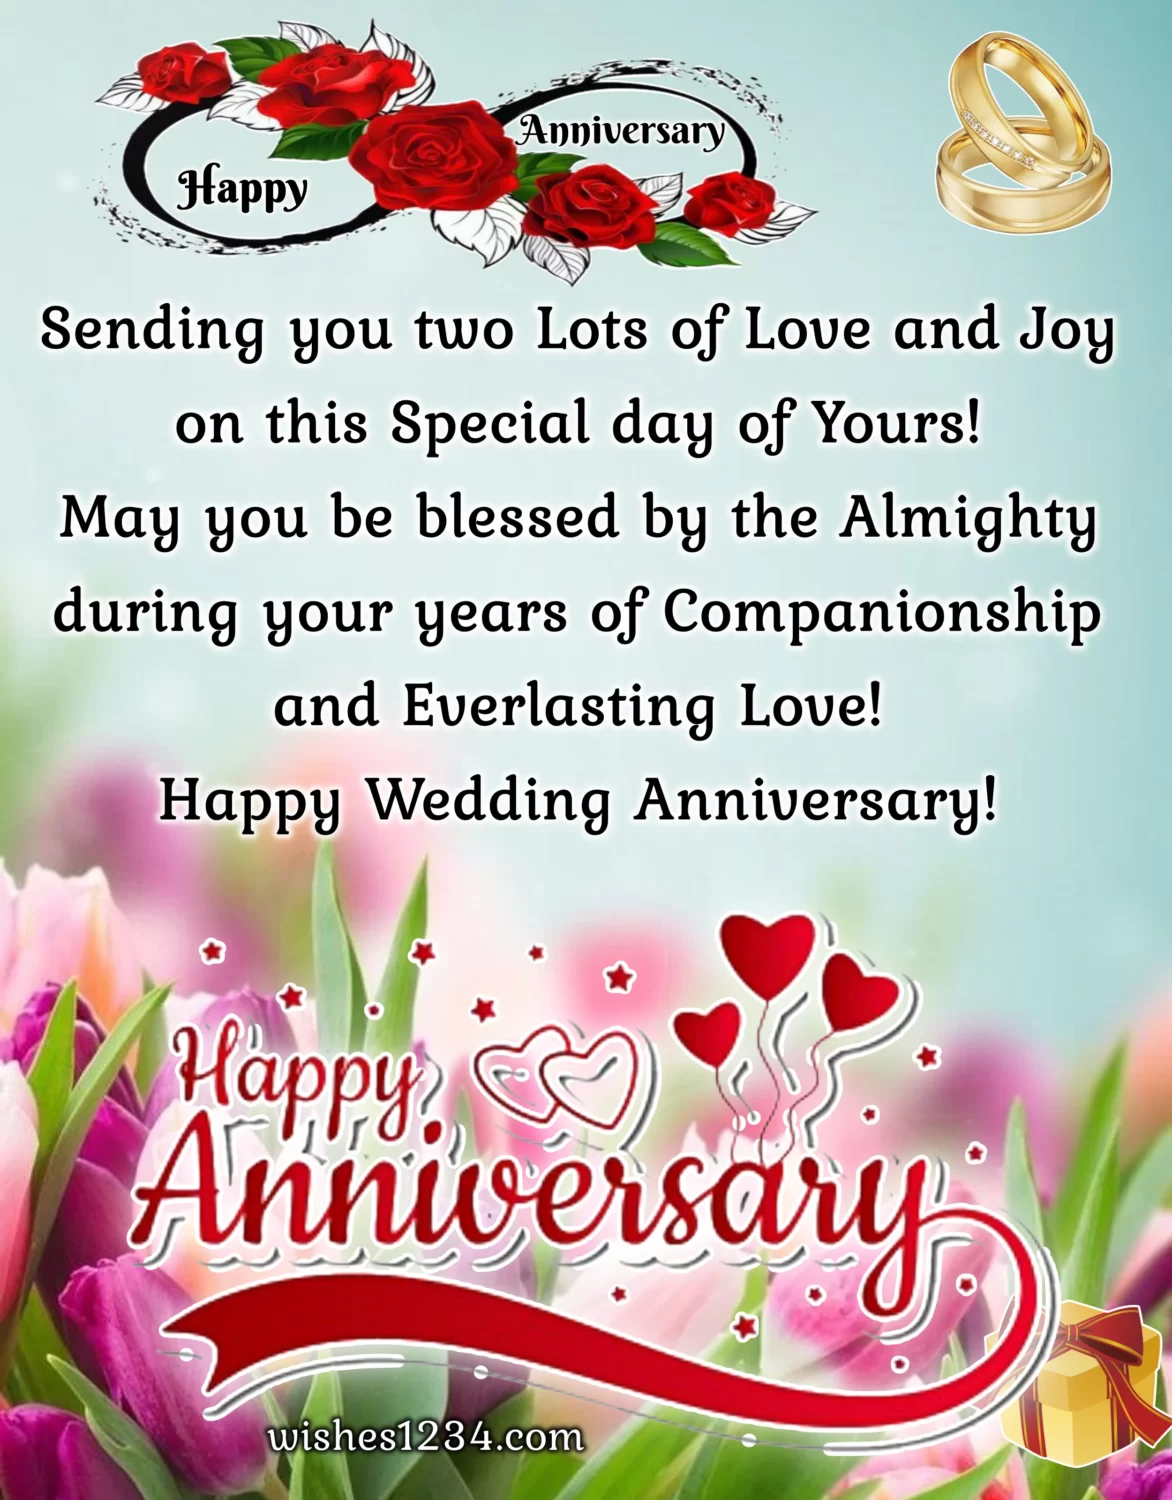 Wedding anniversary greeting with pink tulips, Wedding Anniversary Quotes for Friend.